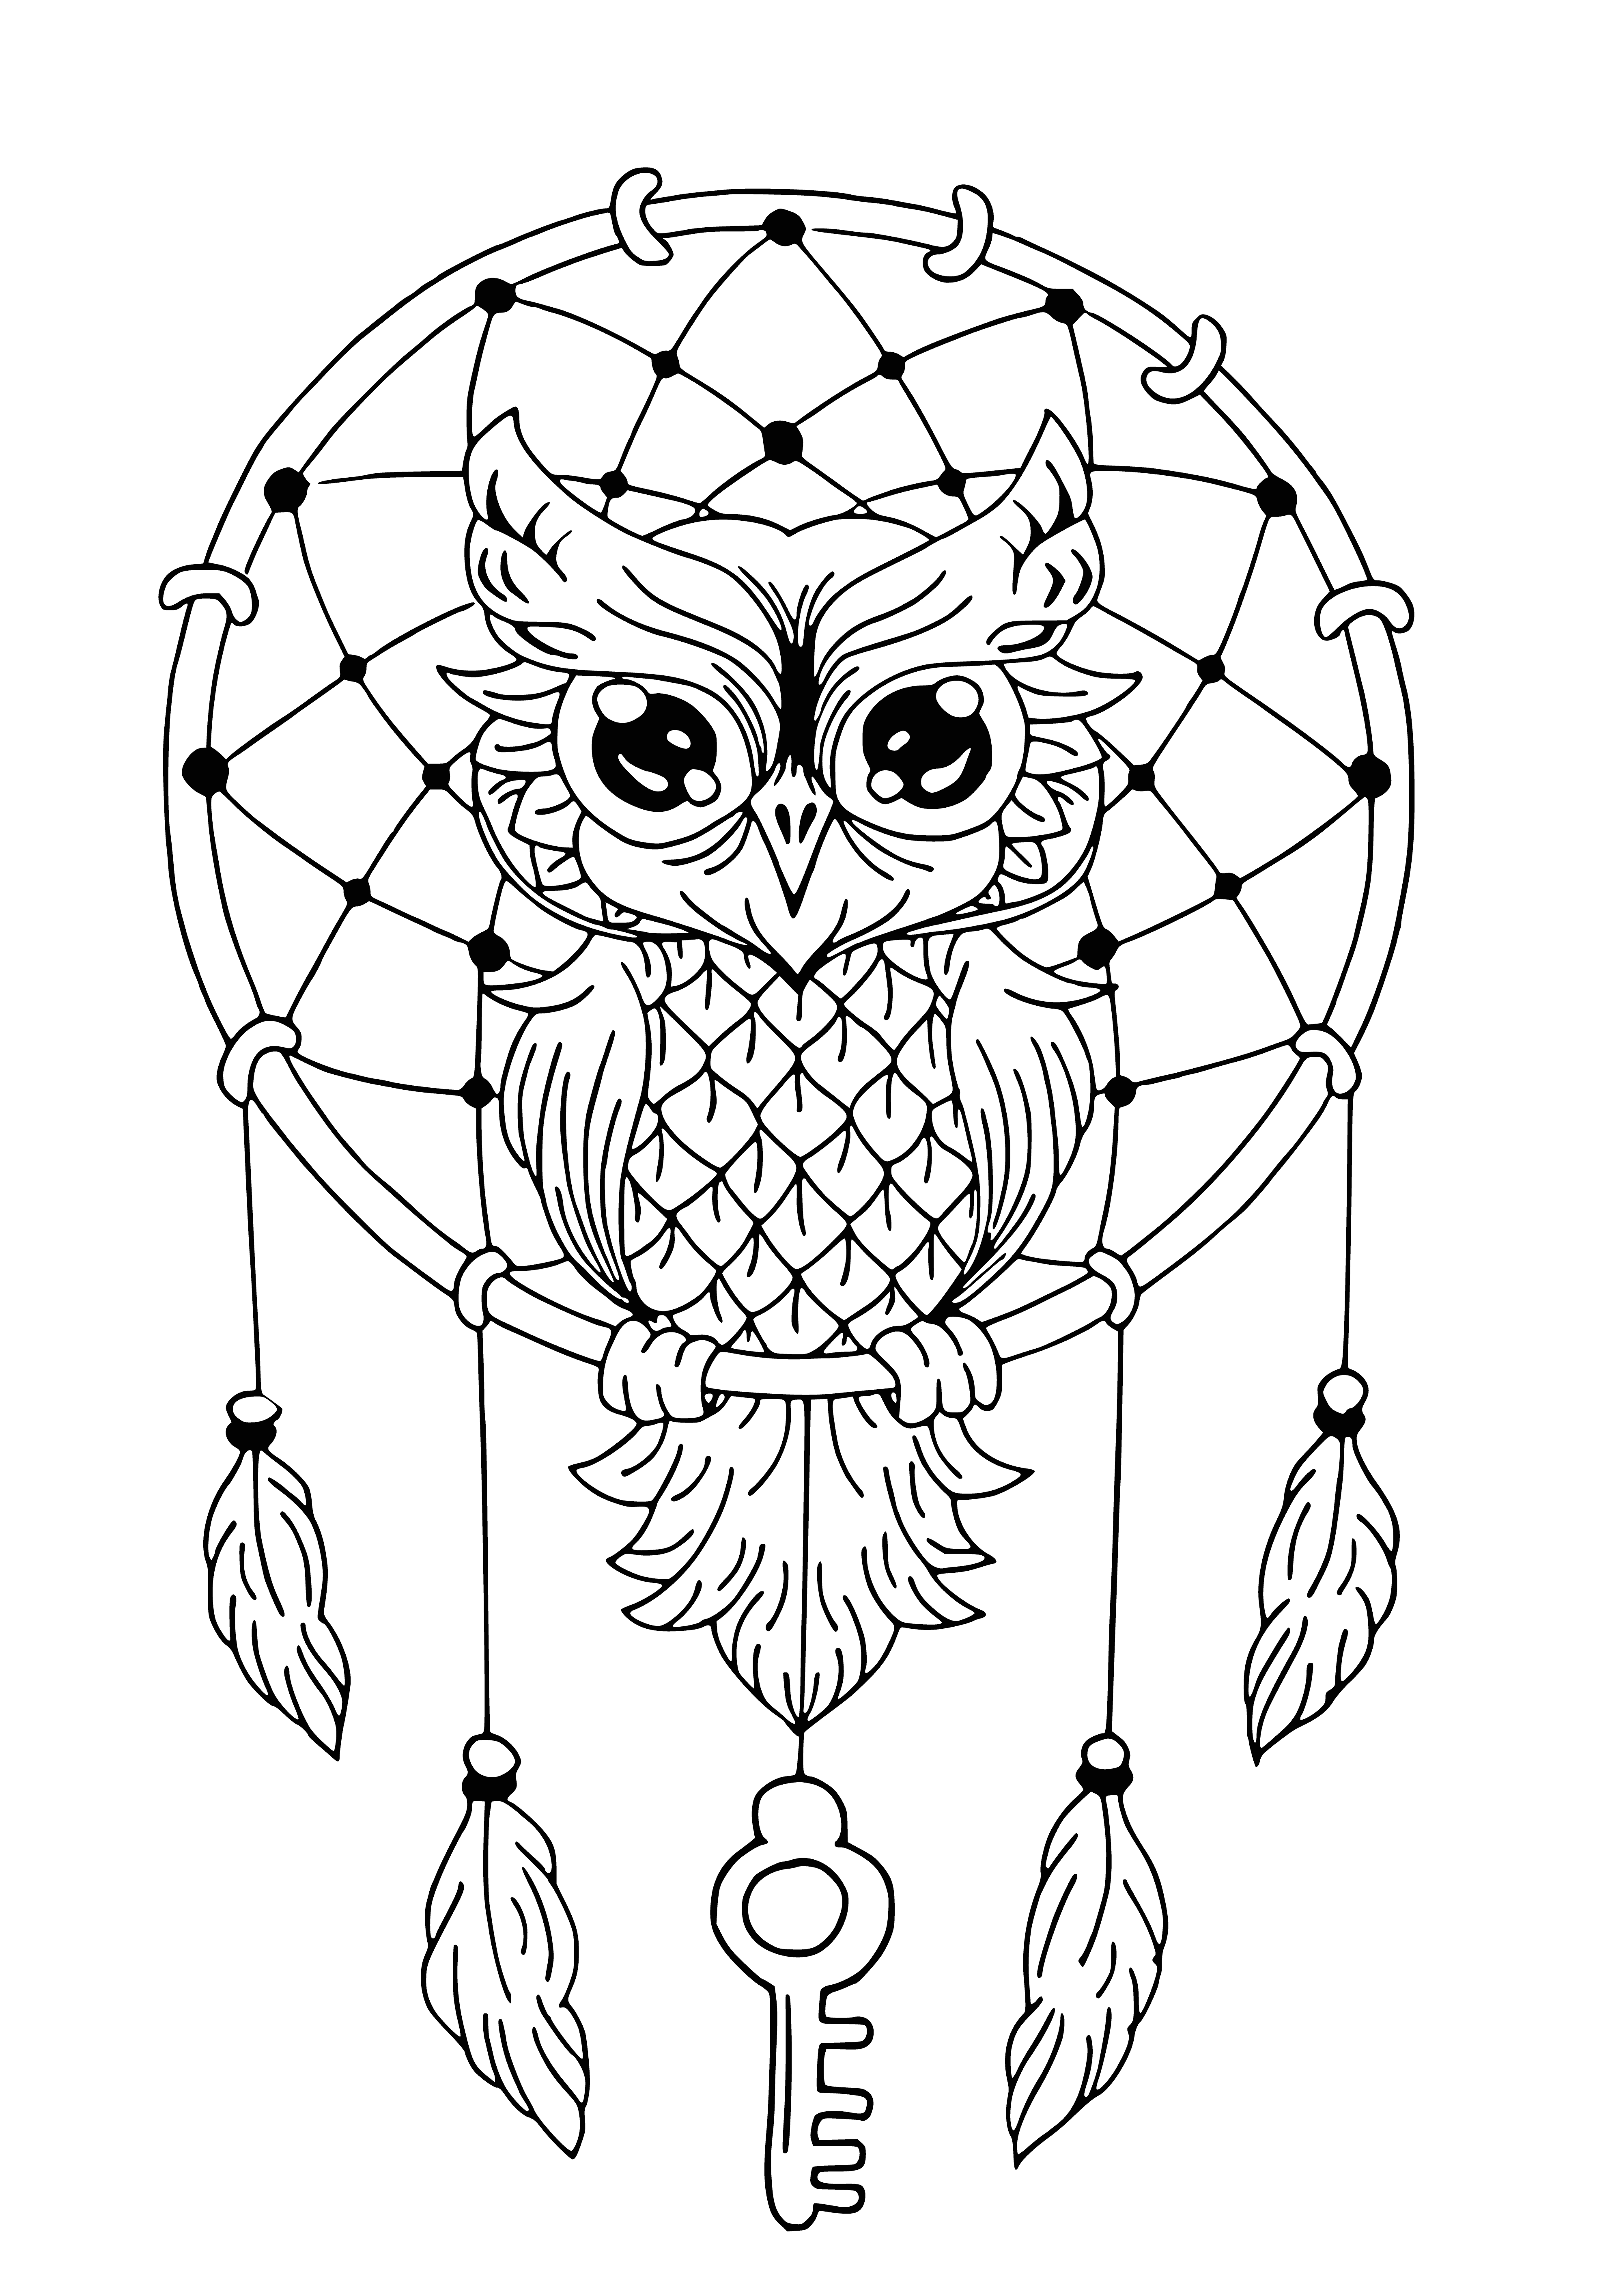 coloring page: Color a dreamcatcher with two owls! Large eyes and beads make this scene come alive.